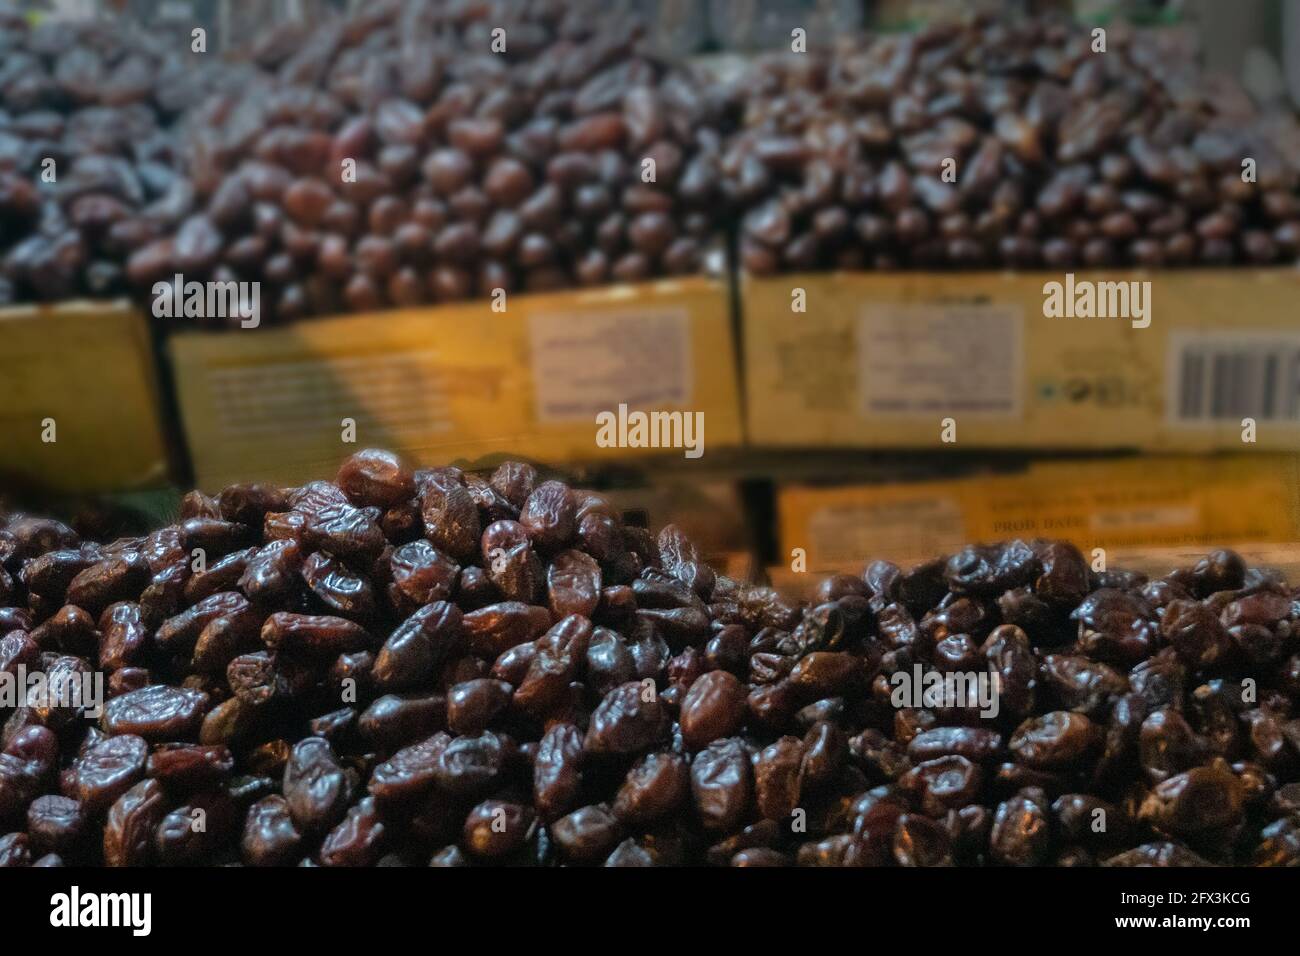 Phoenix dactylifera, commonly known as date or date palm, is a common and famous fruit item - being sold in old delhi market in the evening. Stock Photo